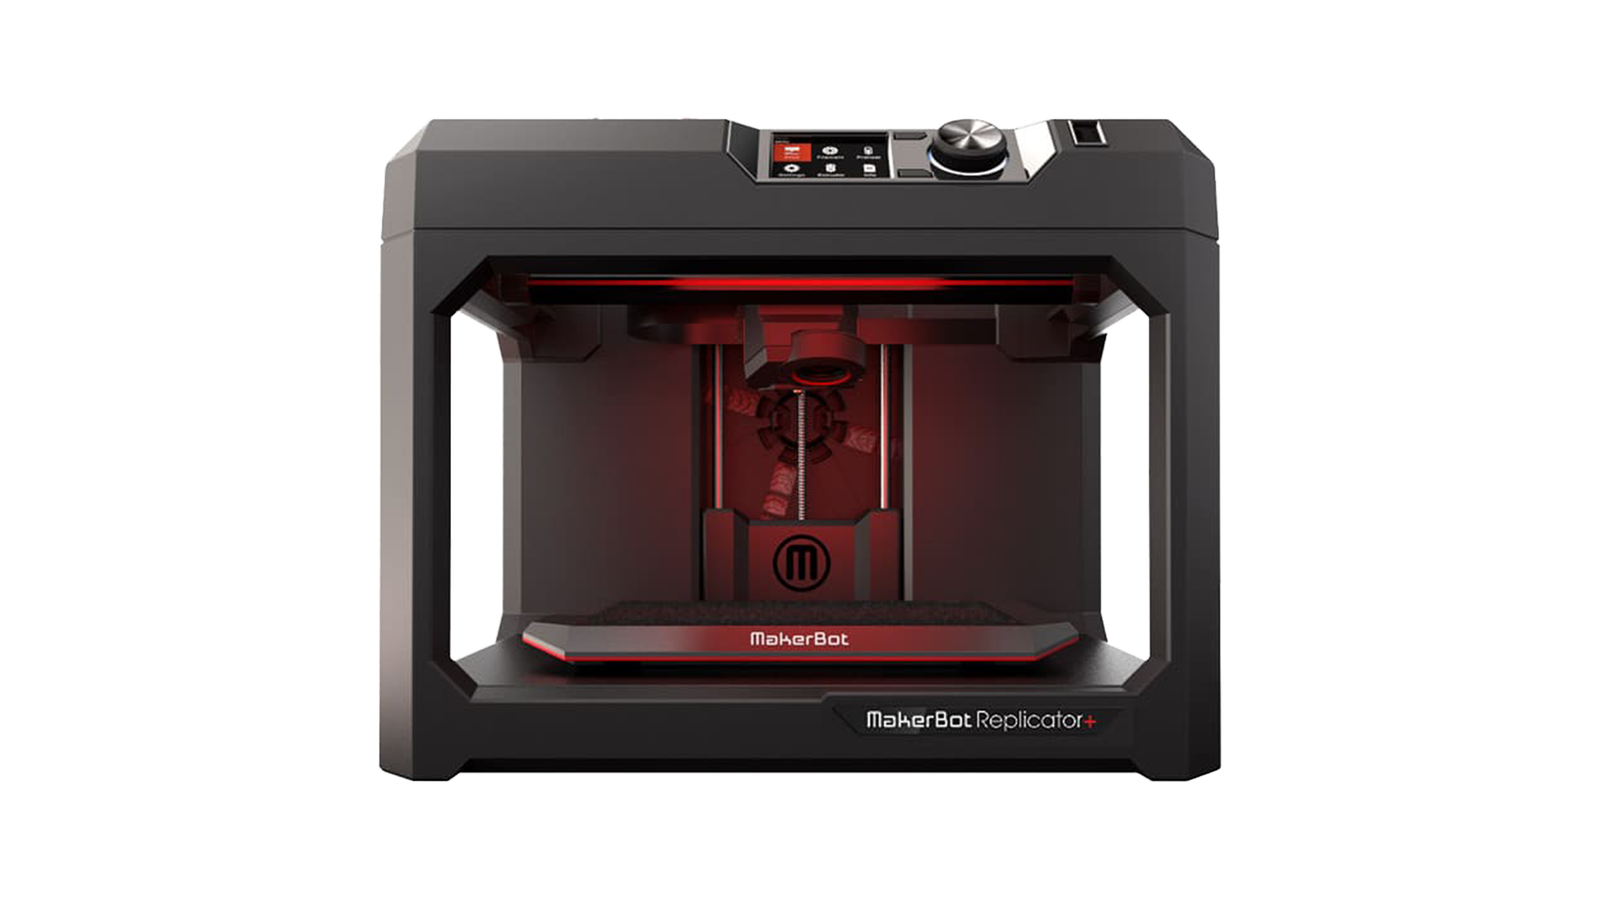 Makerbot replicator - Quiet and reliable